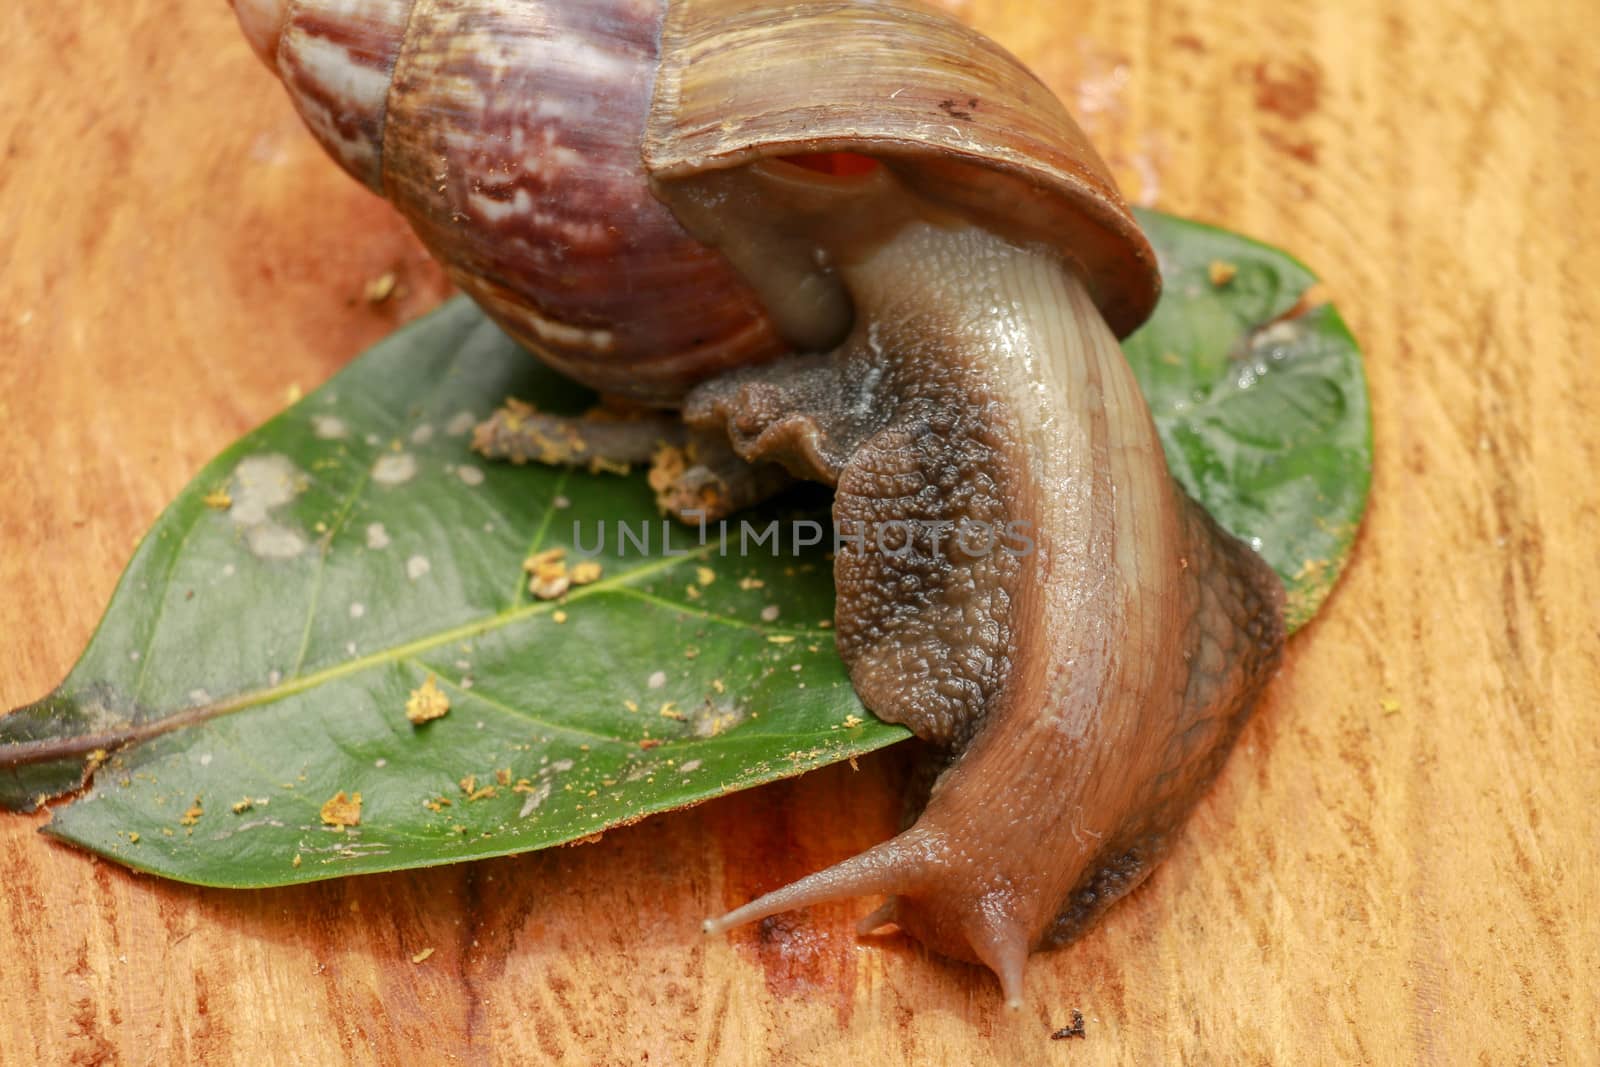 Beautiful patterned brown snail crawls on a wooden surface. Giant african snail.